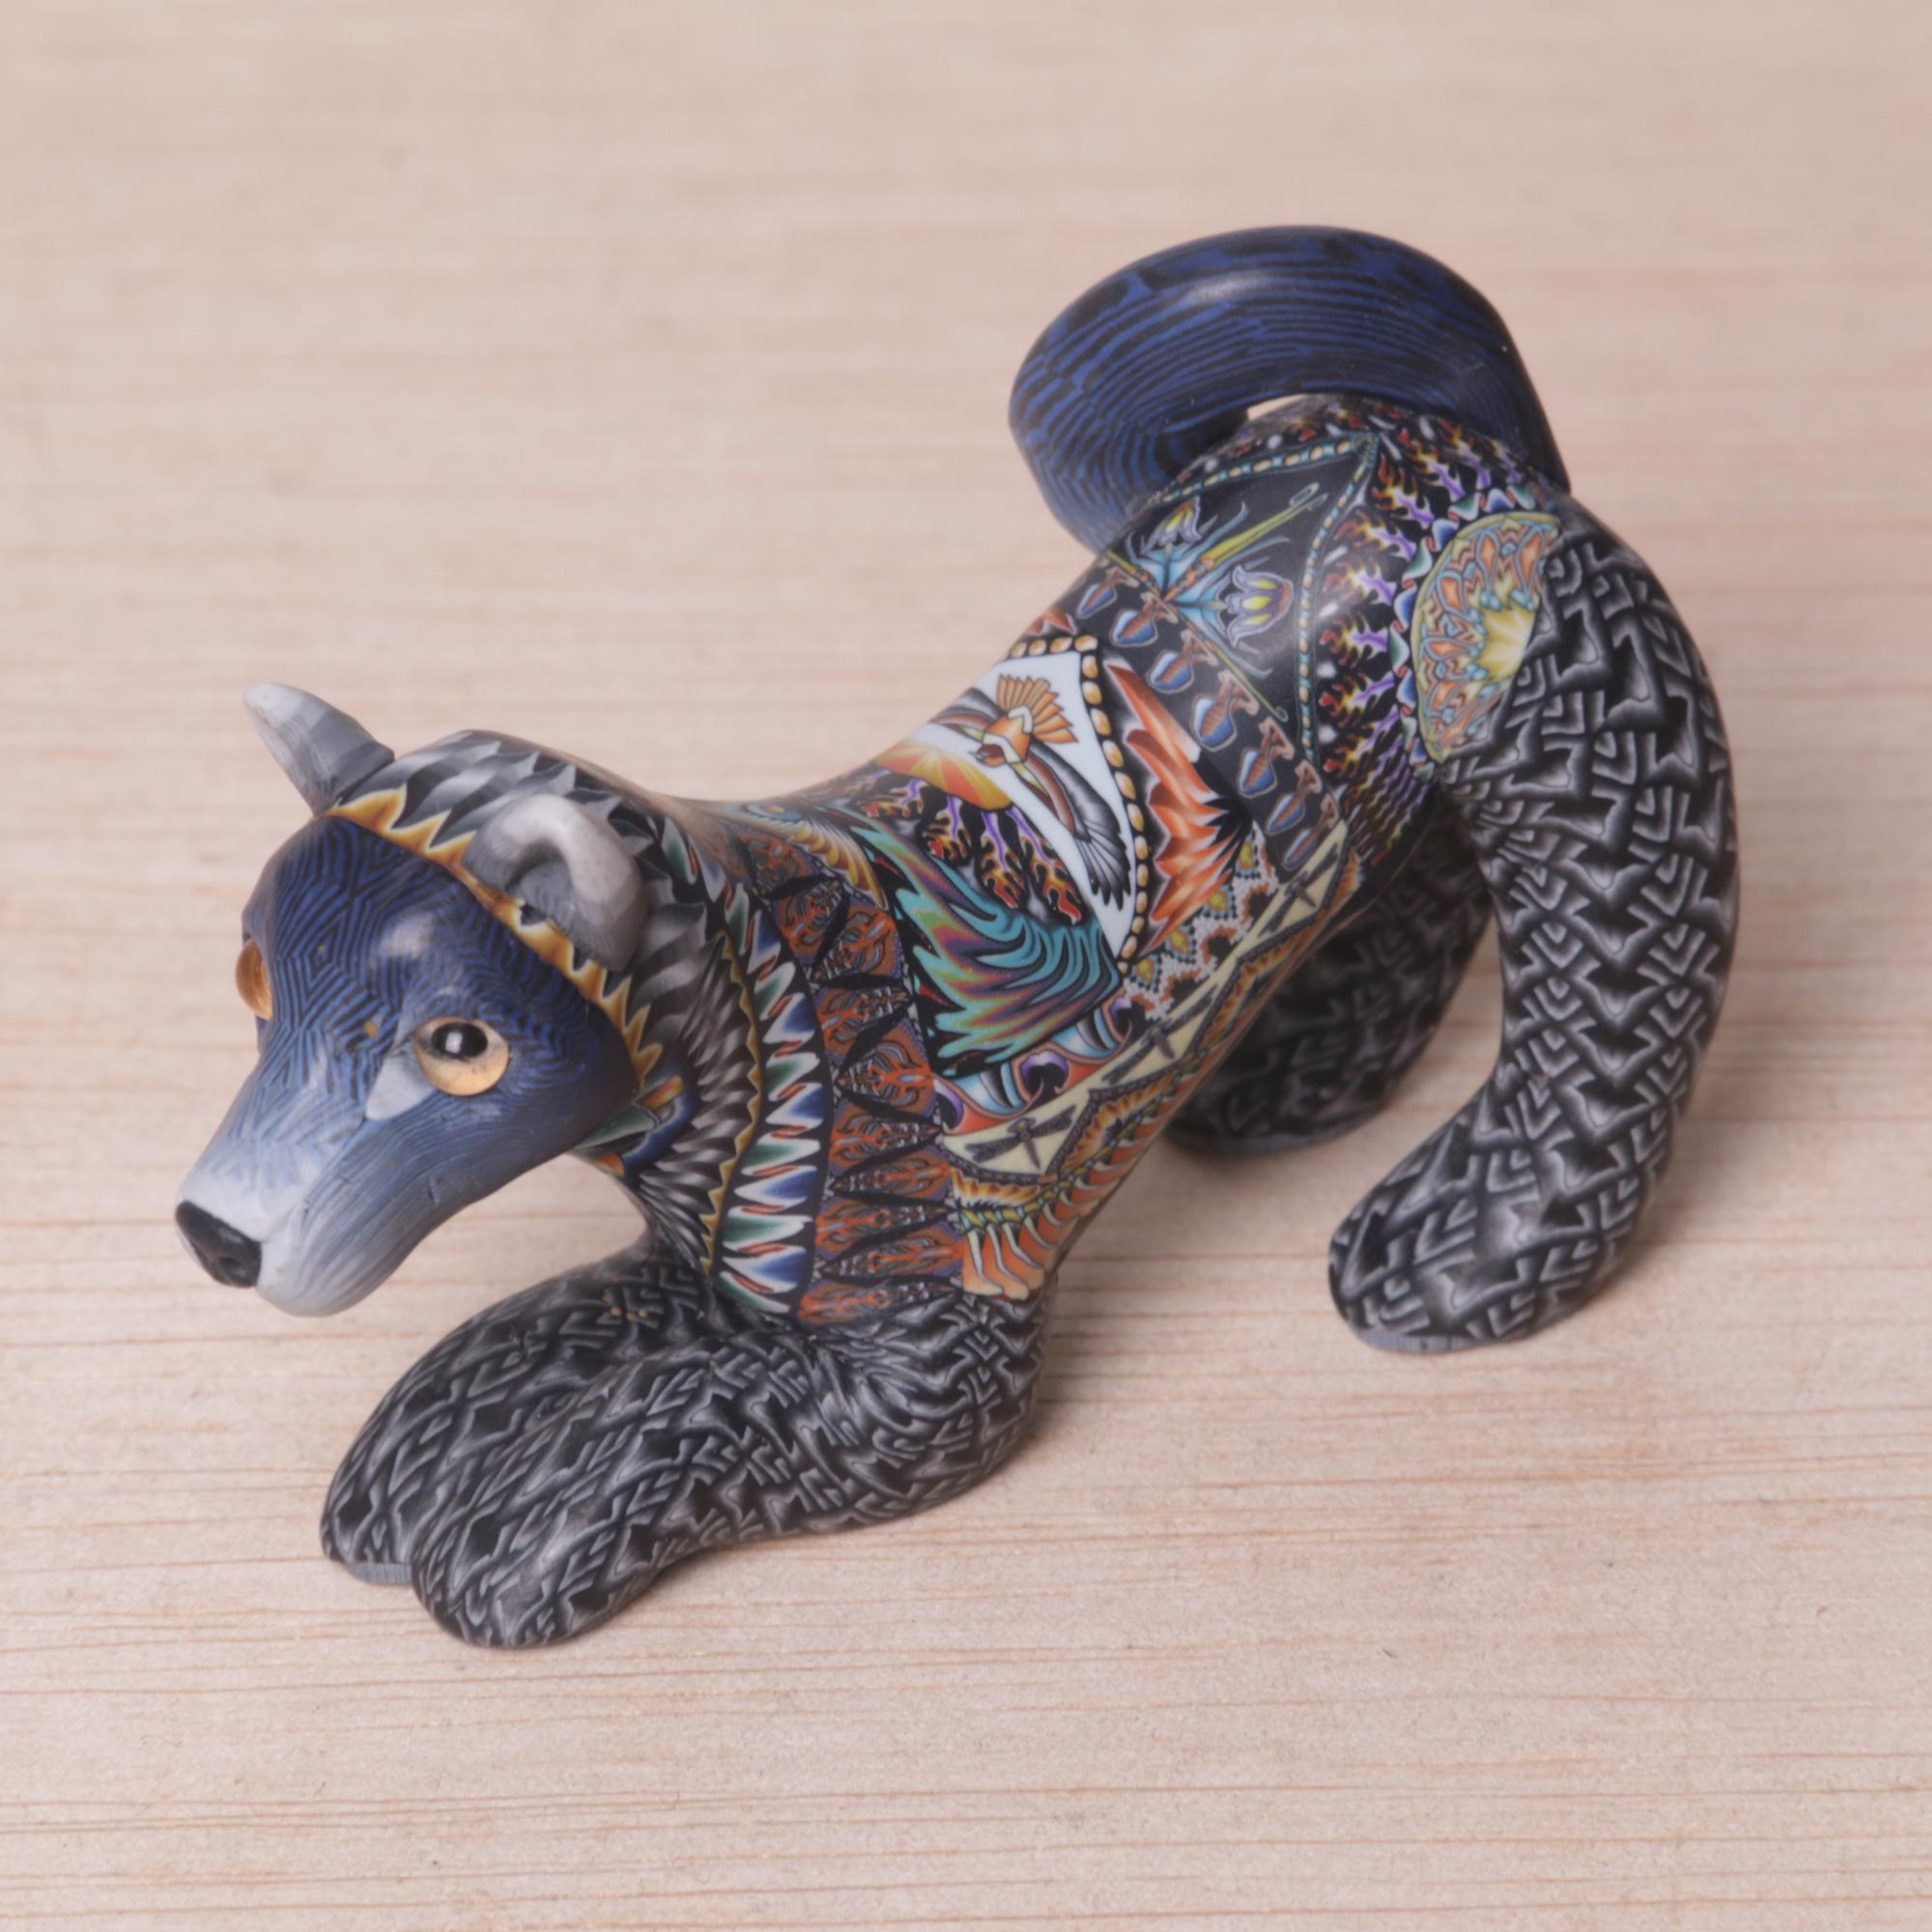 UNICEF Market | Handcrafted Colorful Polymer Clay Dog Sculpture from ...